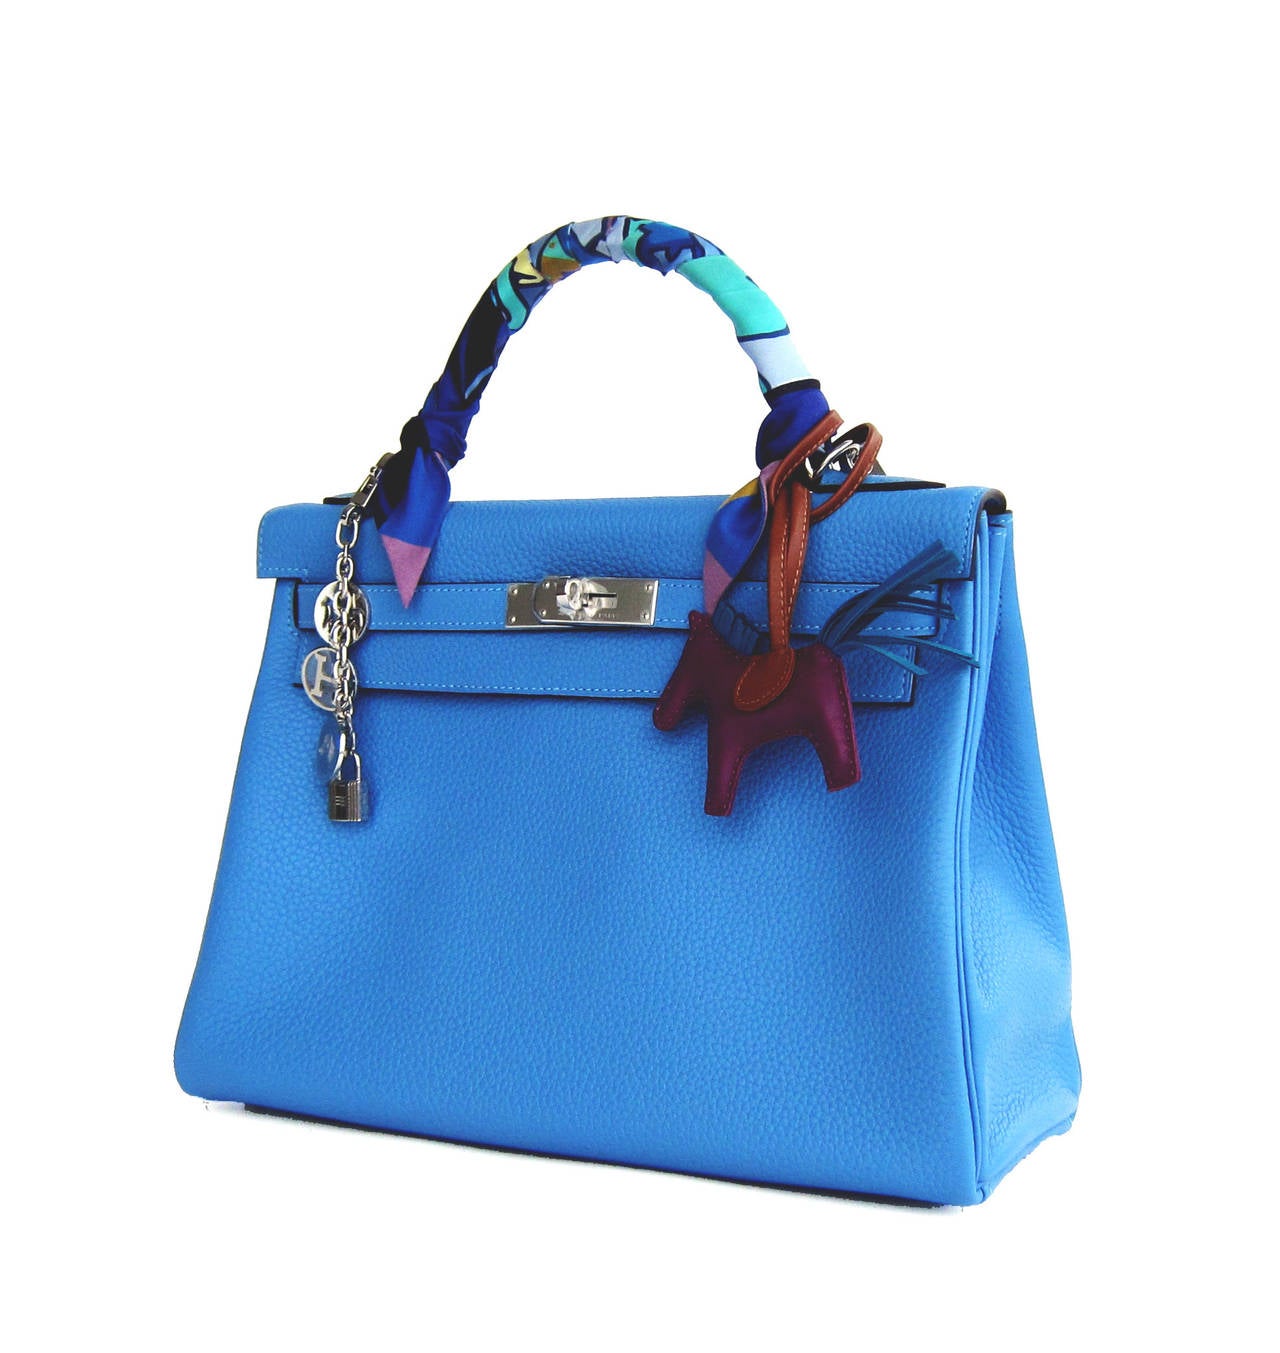 Hermes Blue Paradise 32cm Kelly Palladium Hardware Chic

Perfect Gift!  Brand New in Box- Store Fresh
Comes full set with keys, lock, clochette, shoulder strap, a sleeper for the bag, rain protector, Hermes ribbon, and original box. 
Blue